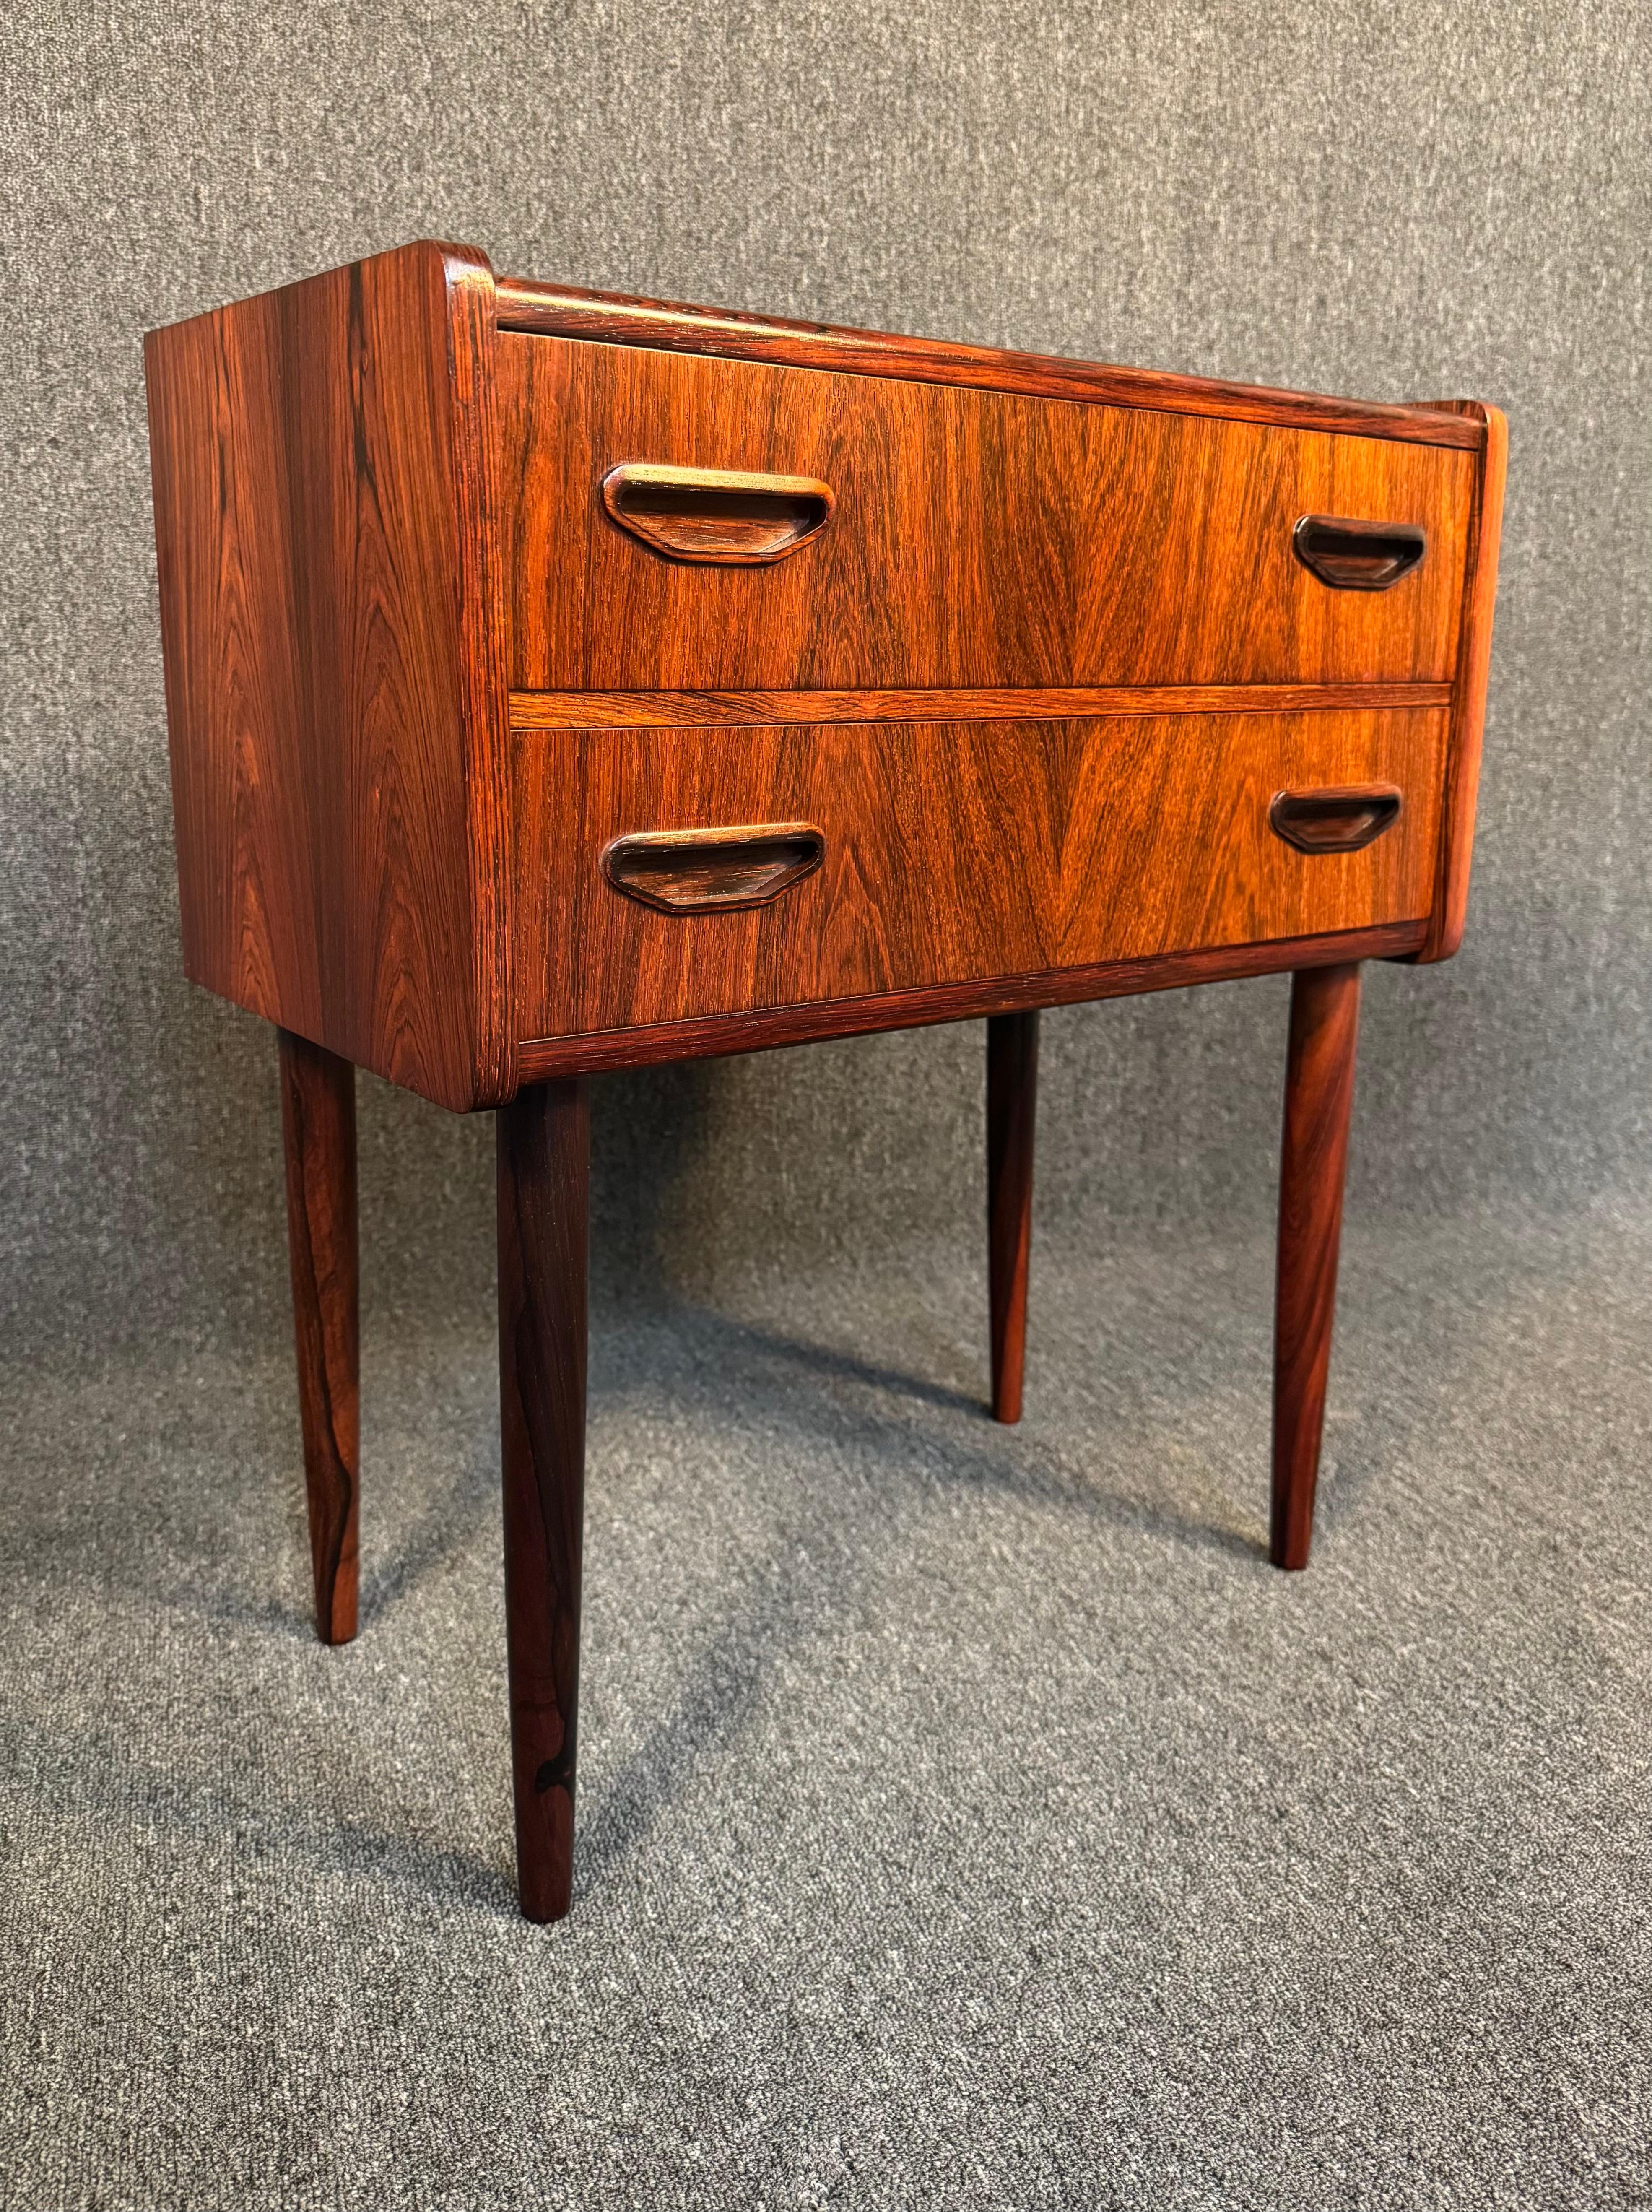 Mid-20th Century Vintage Danish Mid Century Modern Rosewood Nightstand - Entry Chest For Sale